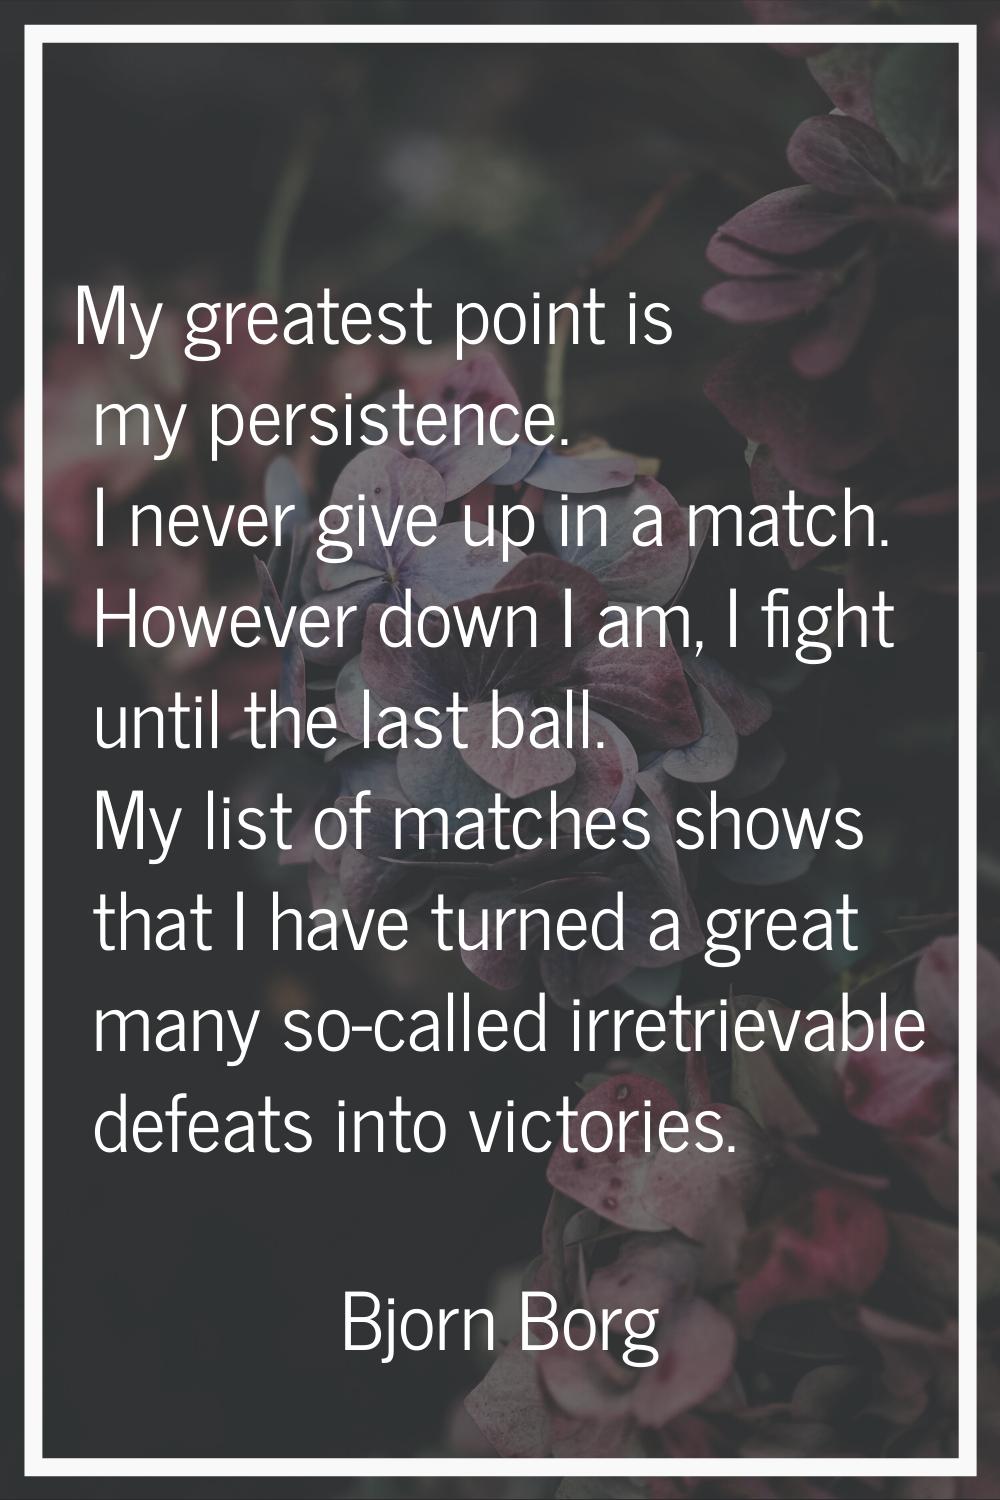 My greatest point is my persistence. I never give up in a match. However down I am, I fight until t